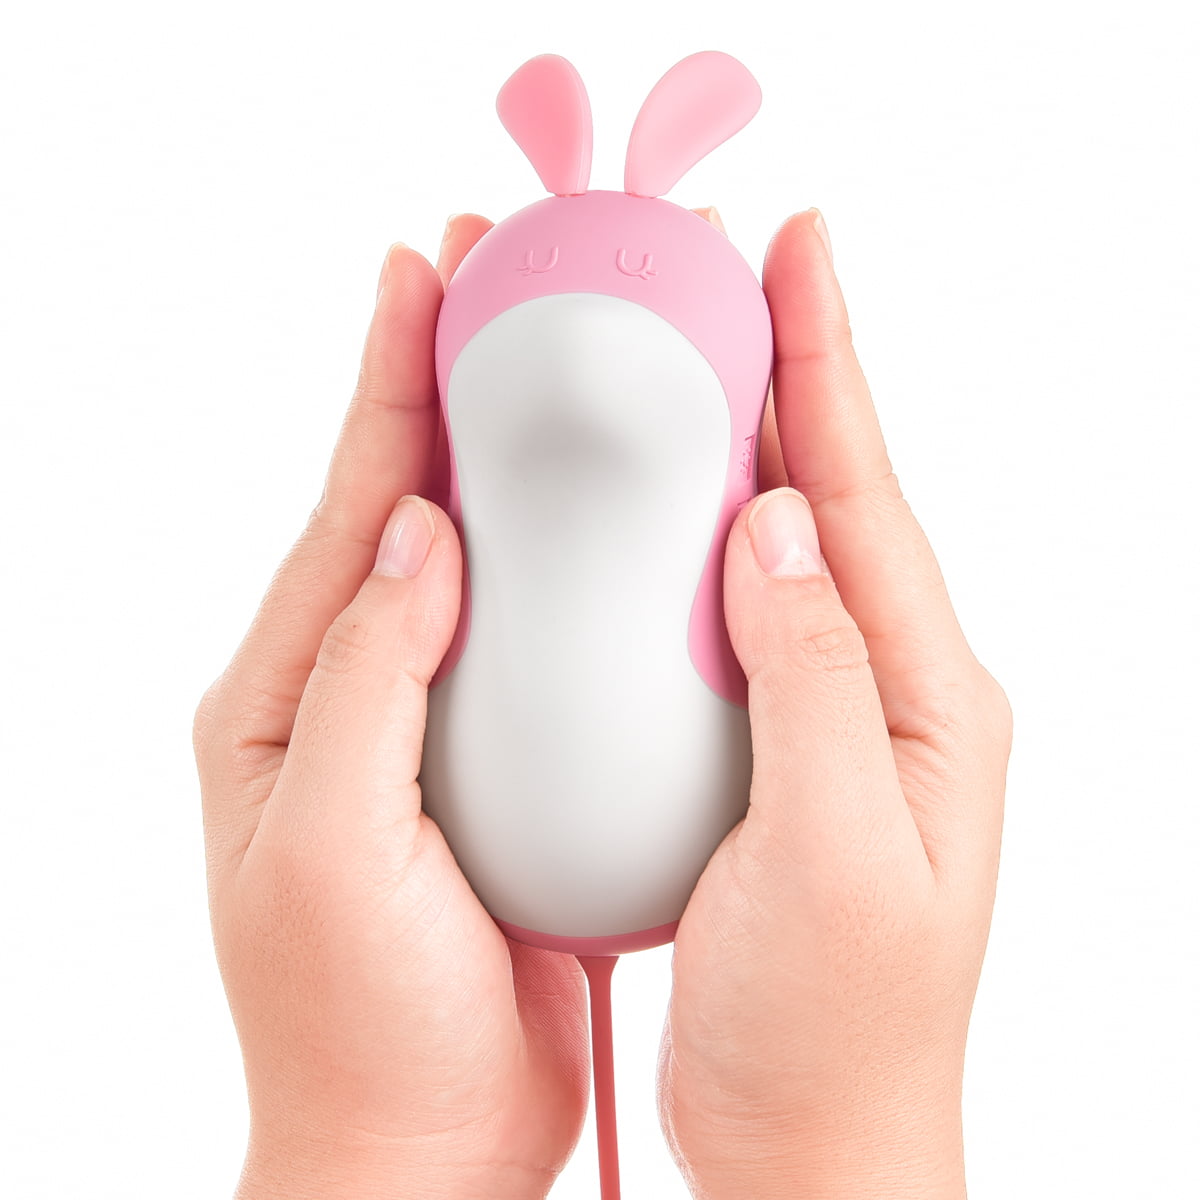 Black Rabbit WiHoo 3 in 1 Hand Warmers/Power Bank Rechargeable with Night Light,6000mAh Cute Rabbit Hand Heaters for Children,Students,Girls and Womens